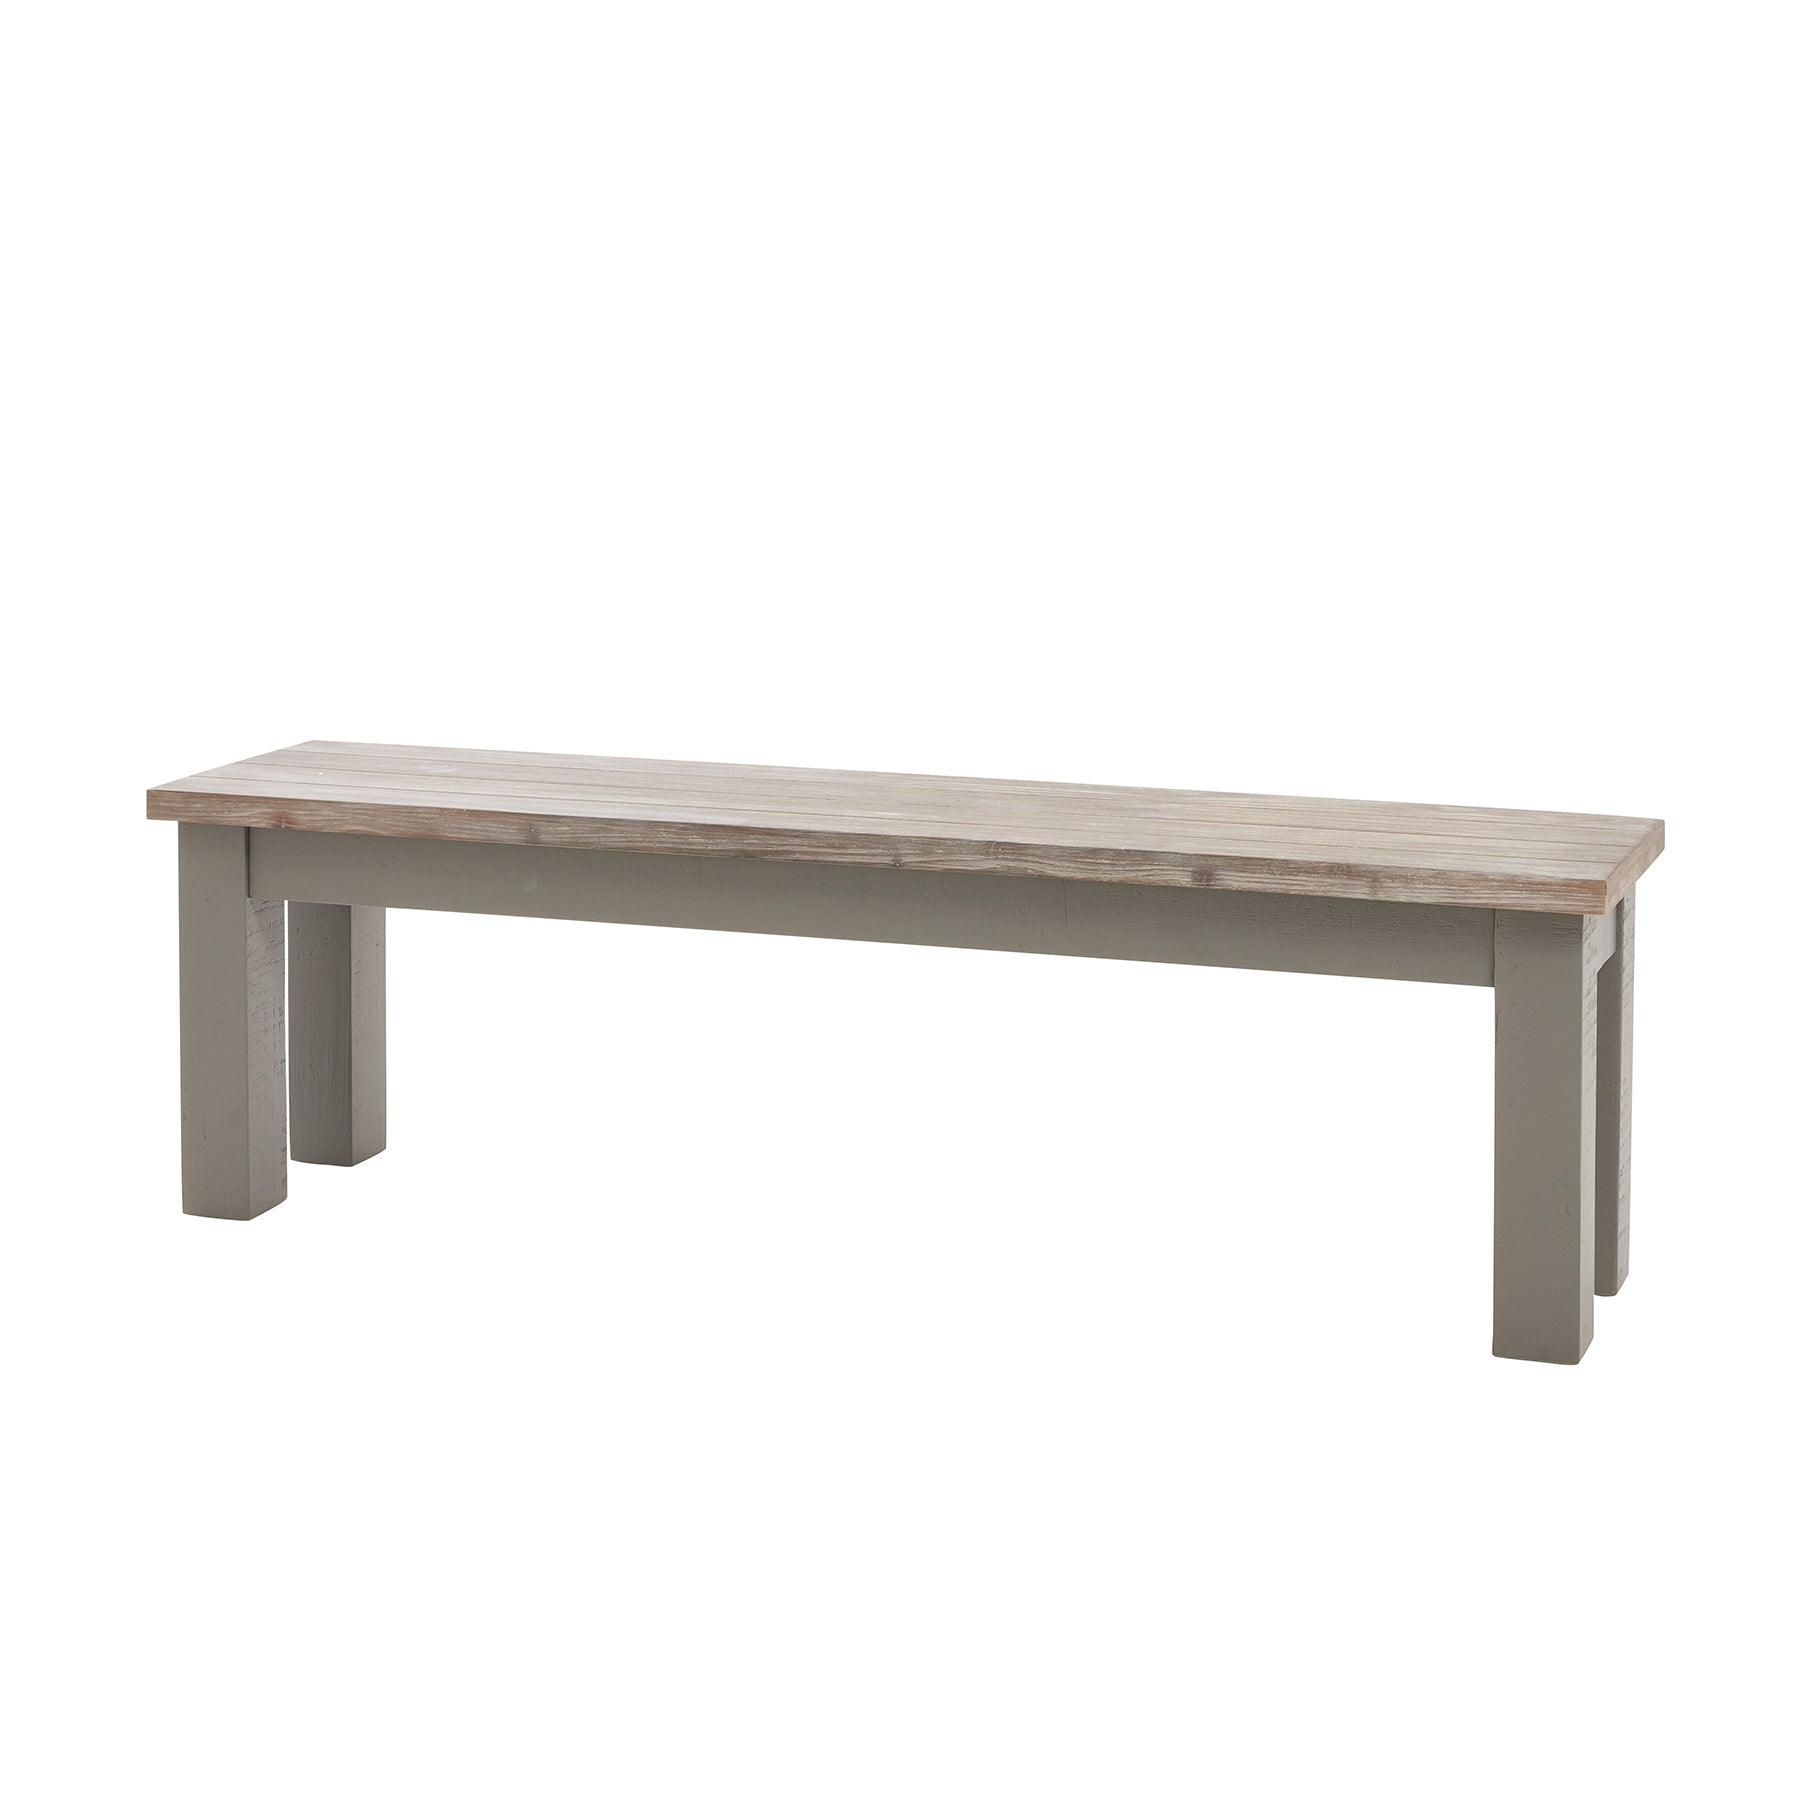 View The Oxley Collection Dining Bench information